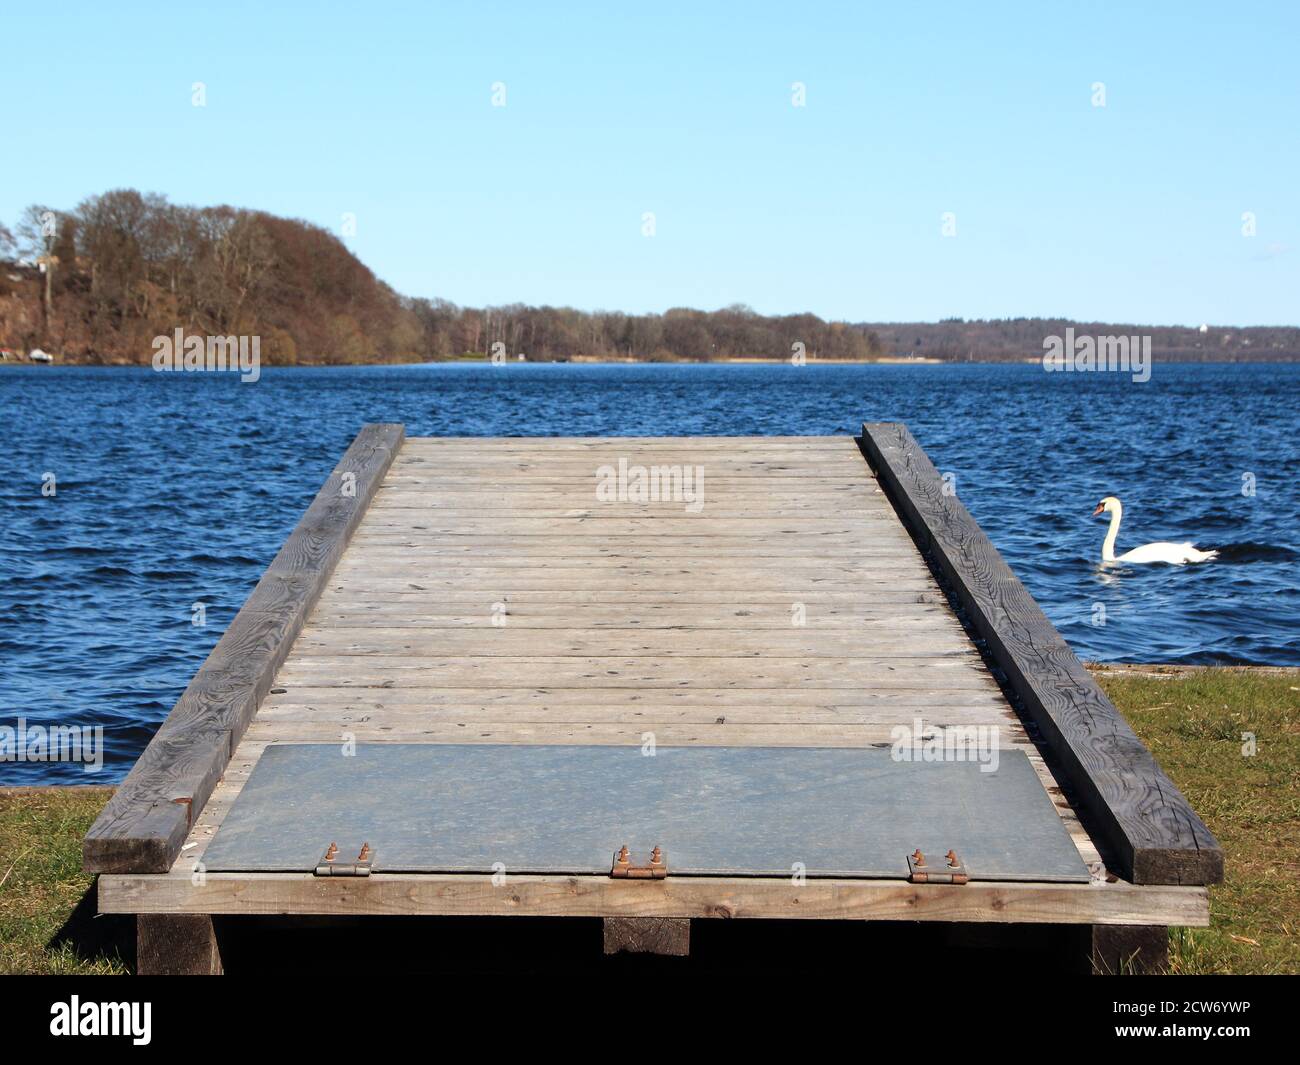 A mobile landing pier at a classic Scandinavian blue lake. There is a swan in the background. Stock Photo